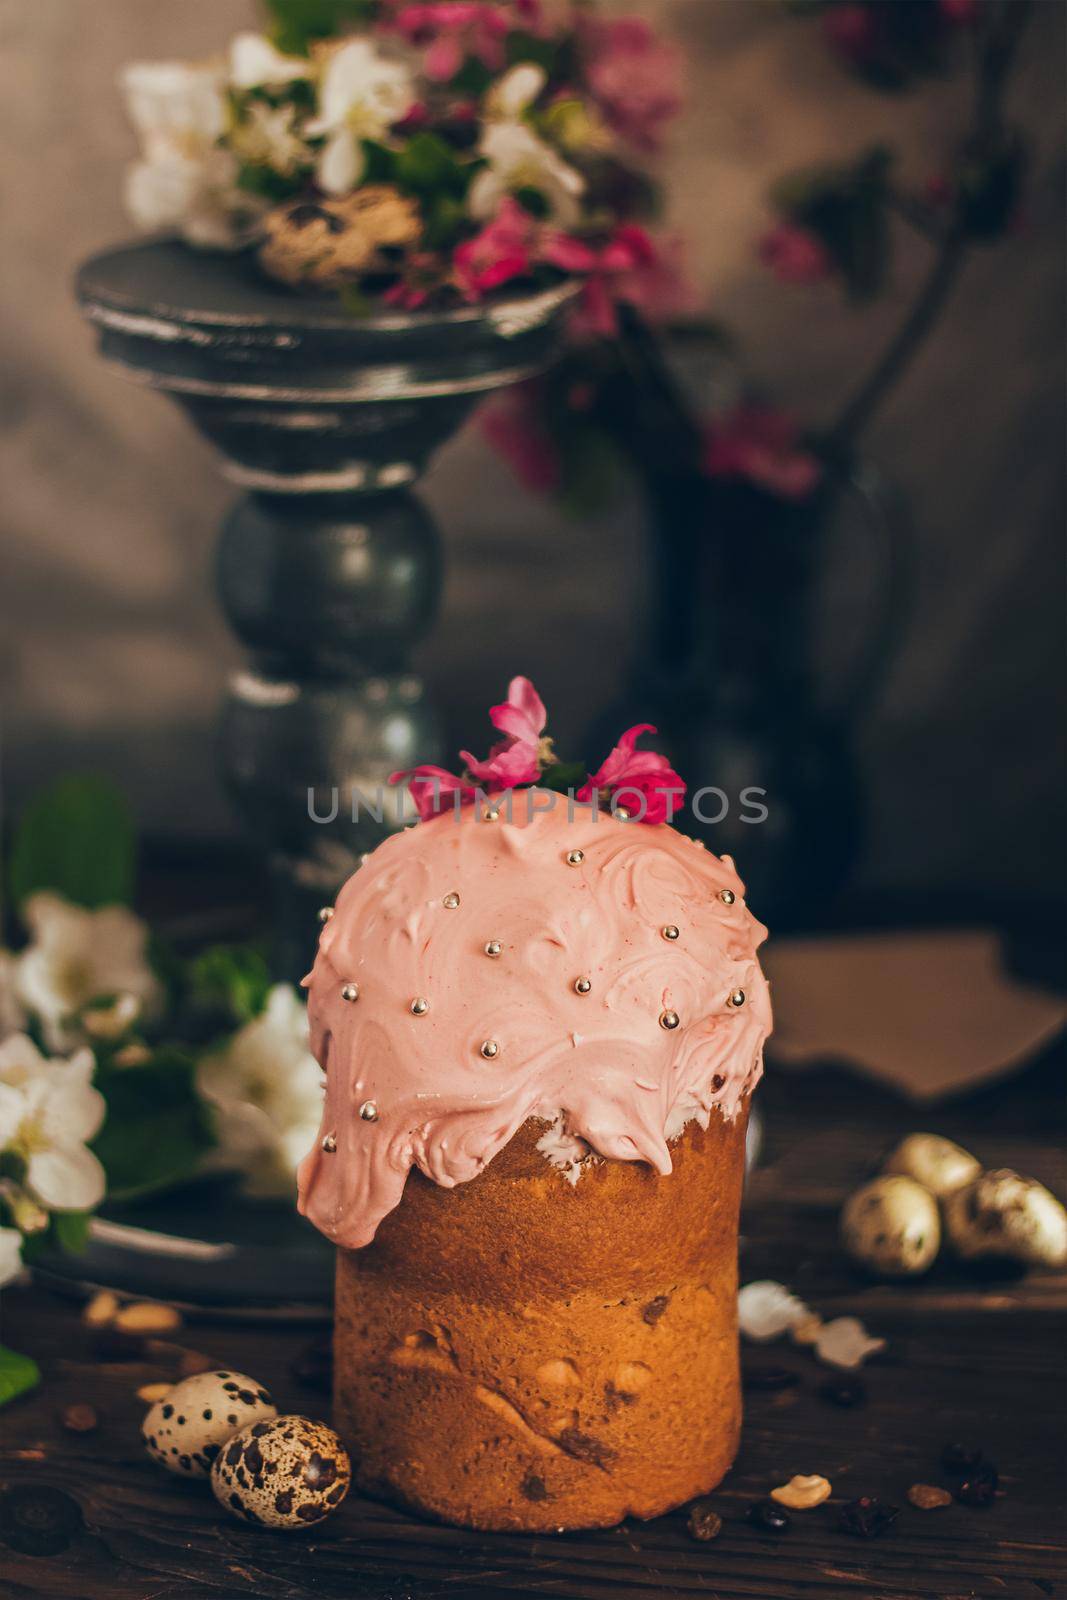 Traditional Russian Orthodox Easter bread kulich with apple blossom and colored eggs